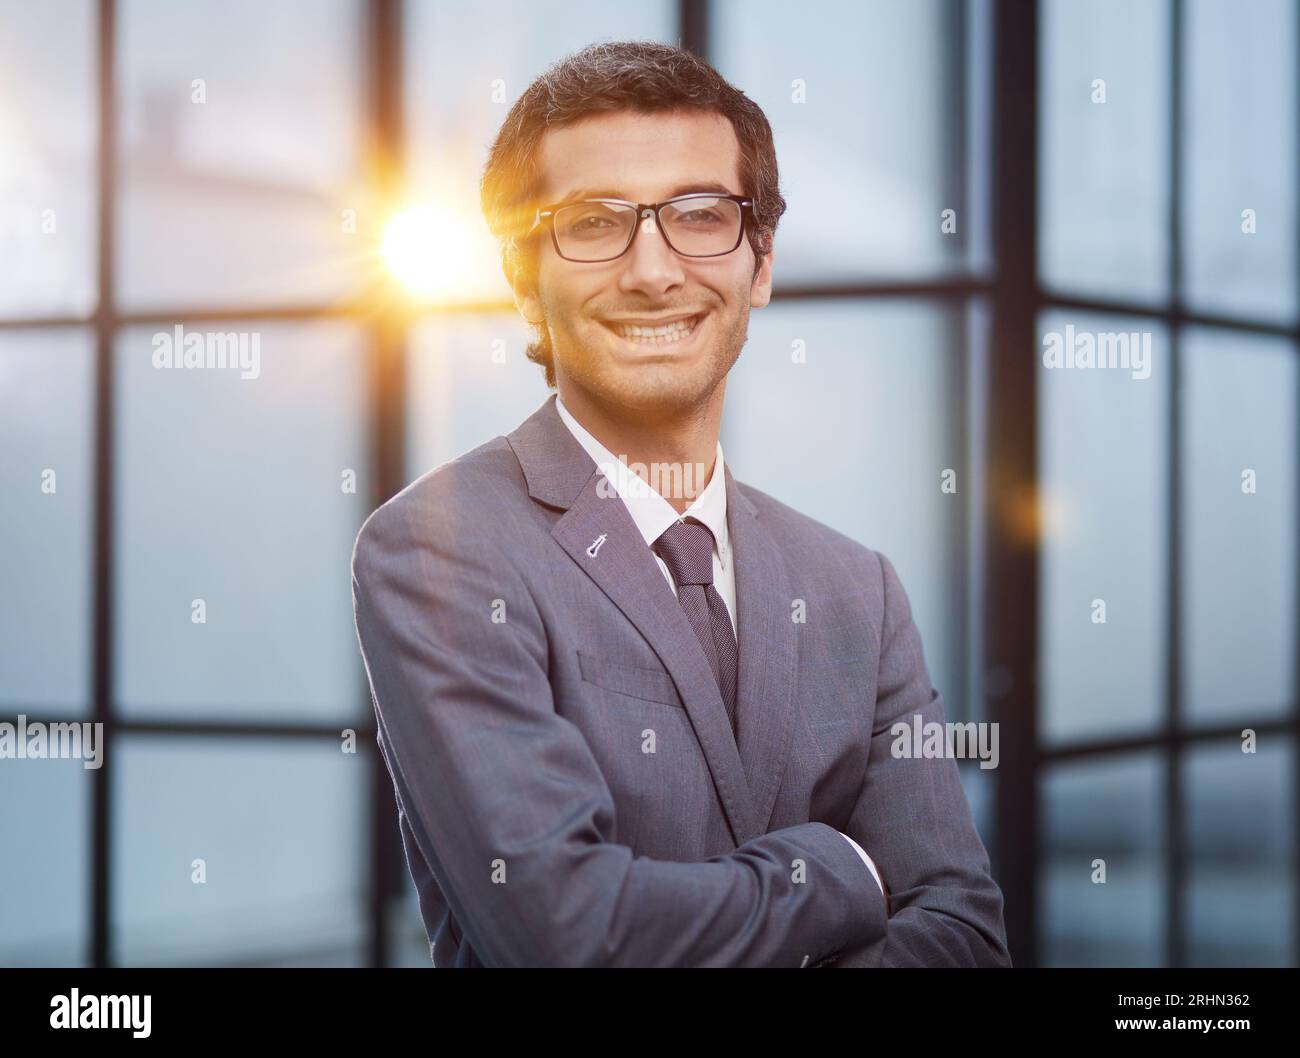 Satisfaction Survey Concept A confident business man with his arms crossed in front of an office building background Stock Photo